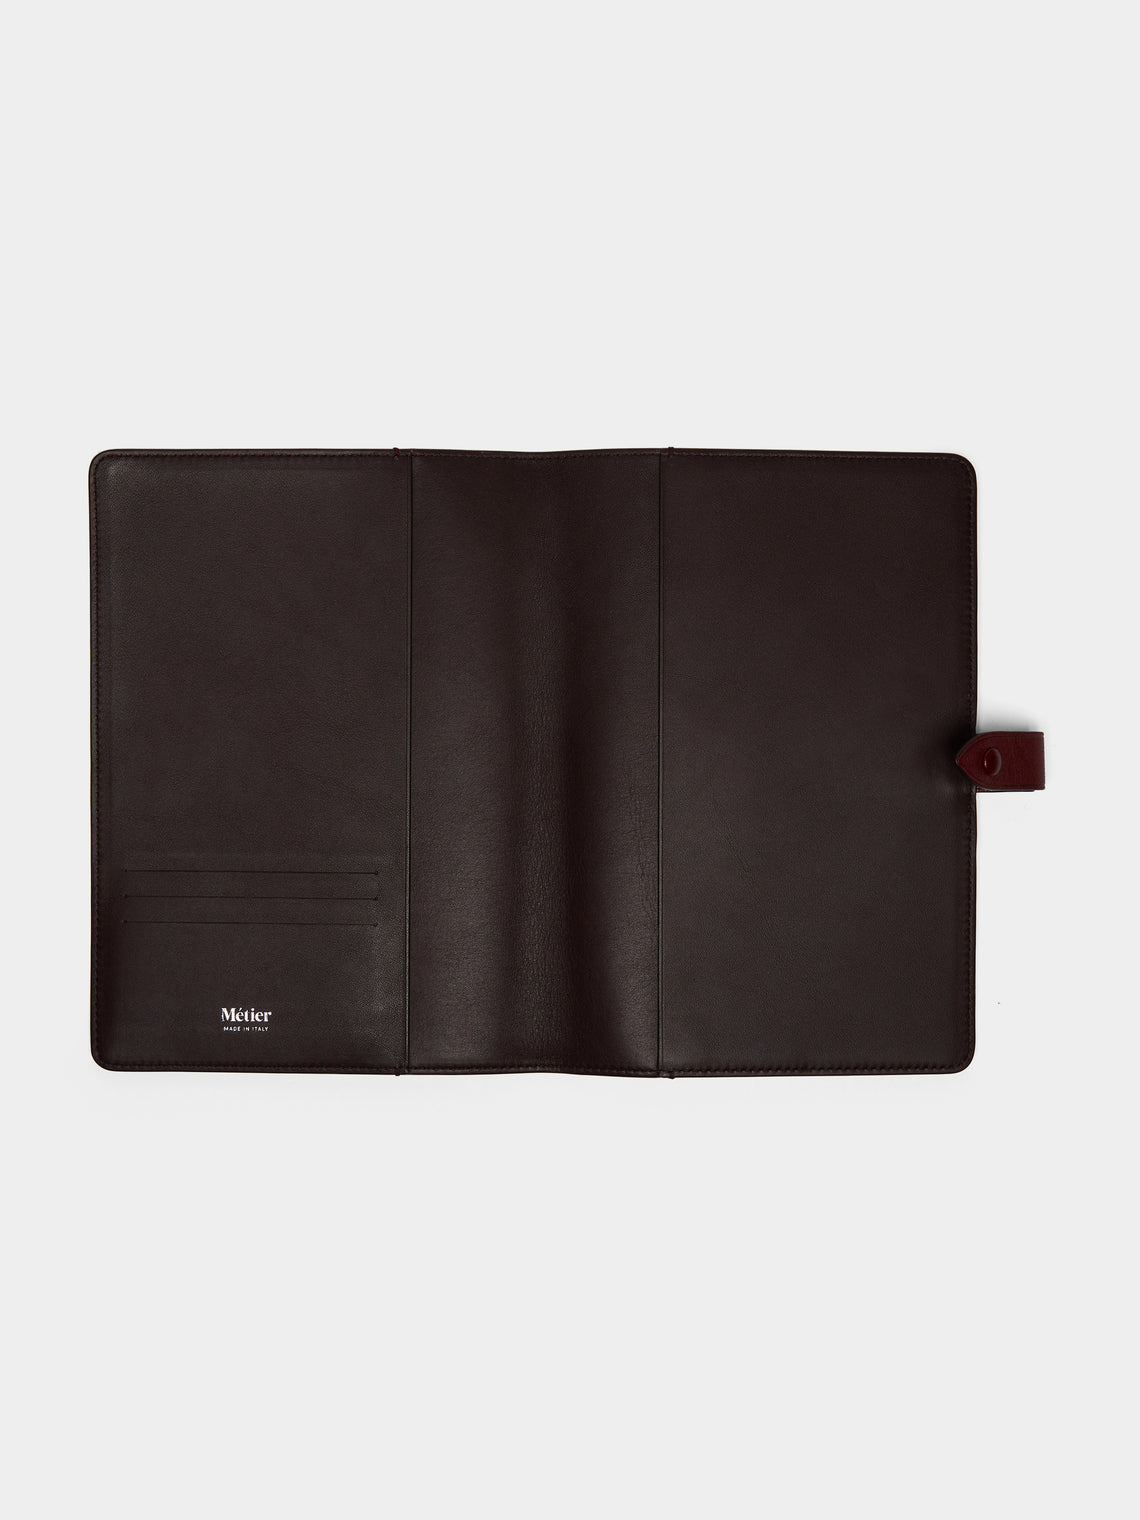 Métier - Leather A5 Notebook Cover - Burgundy - ABASK